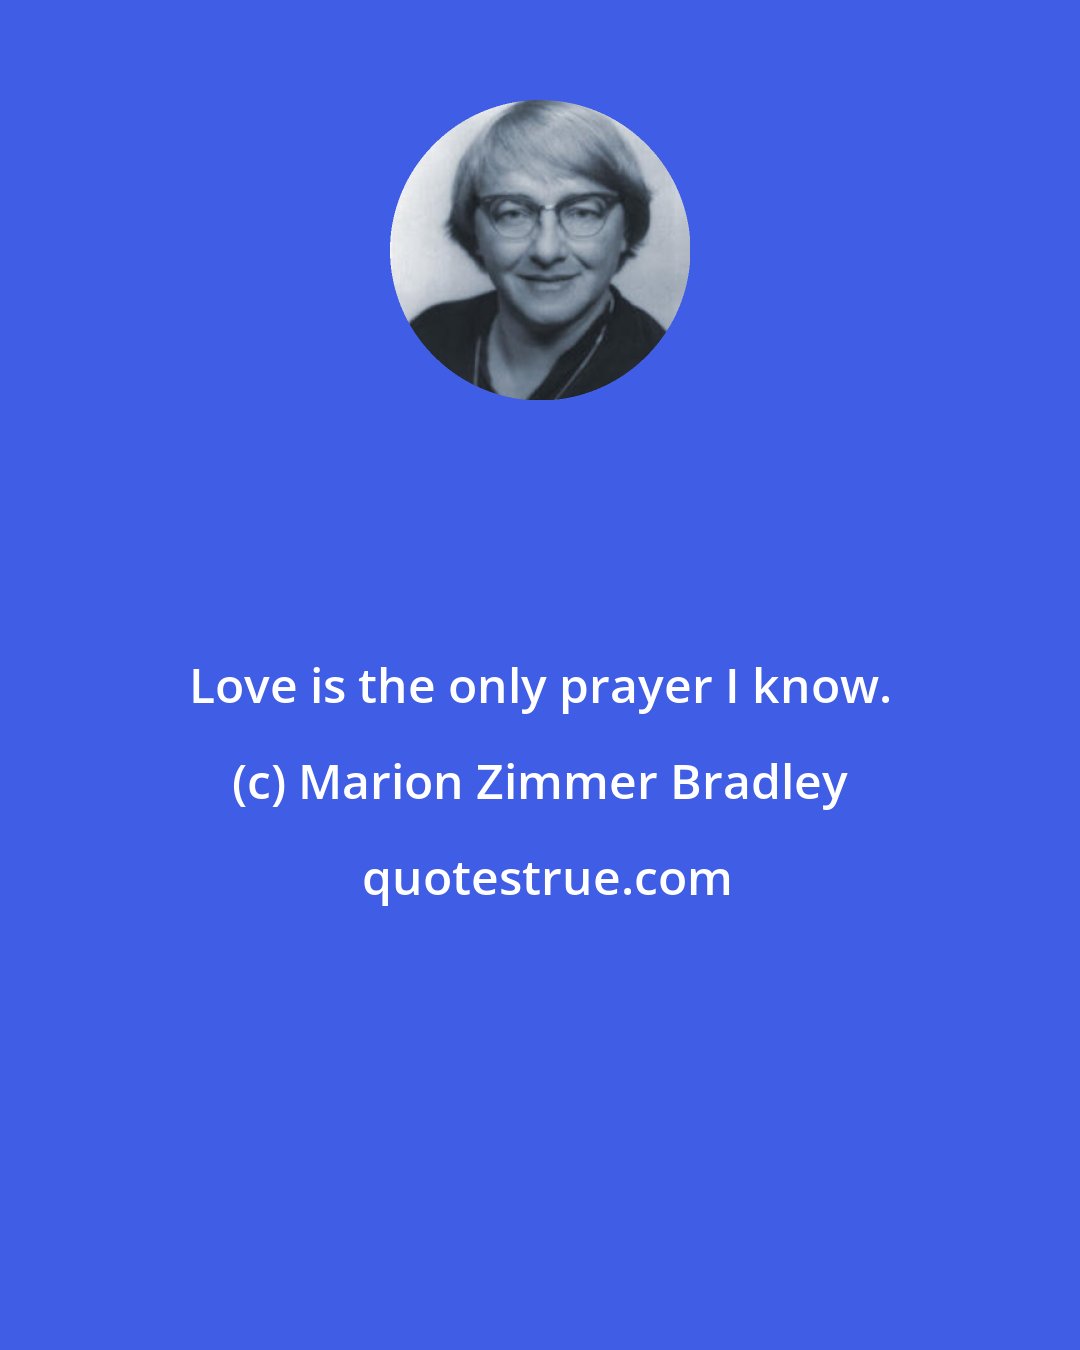 Marion Zimmer Bradley: Love is the only prayer I know.